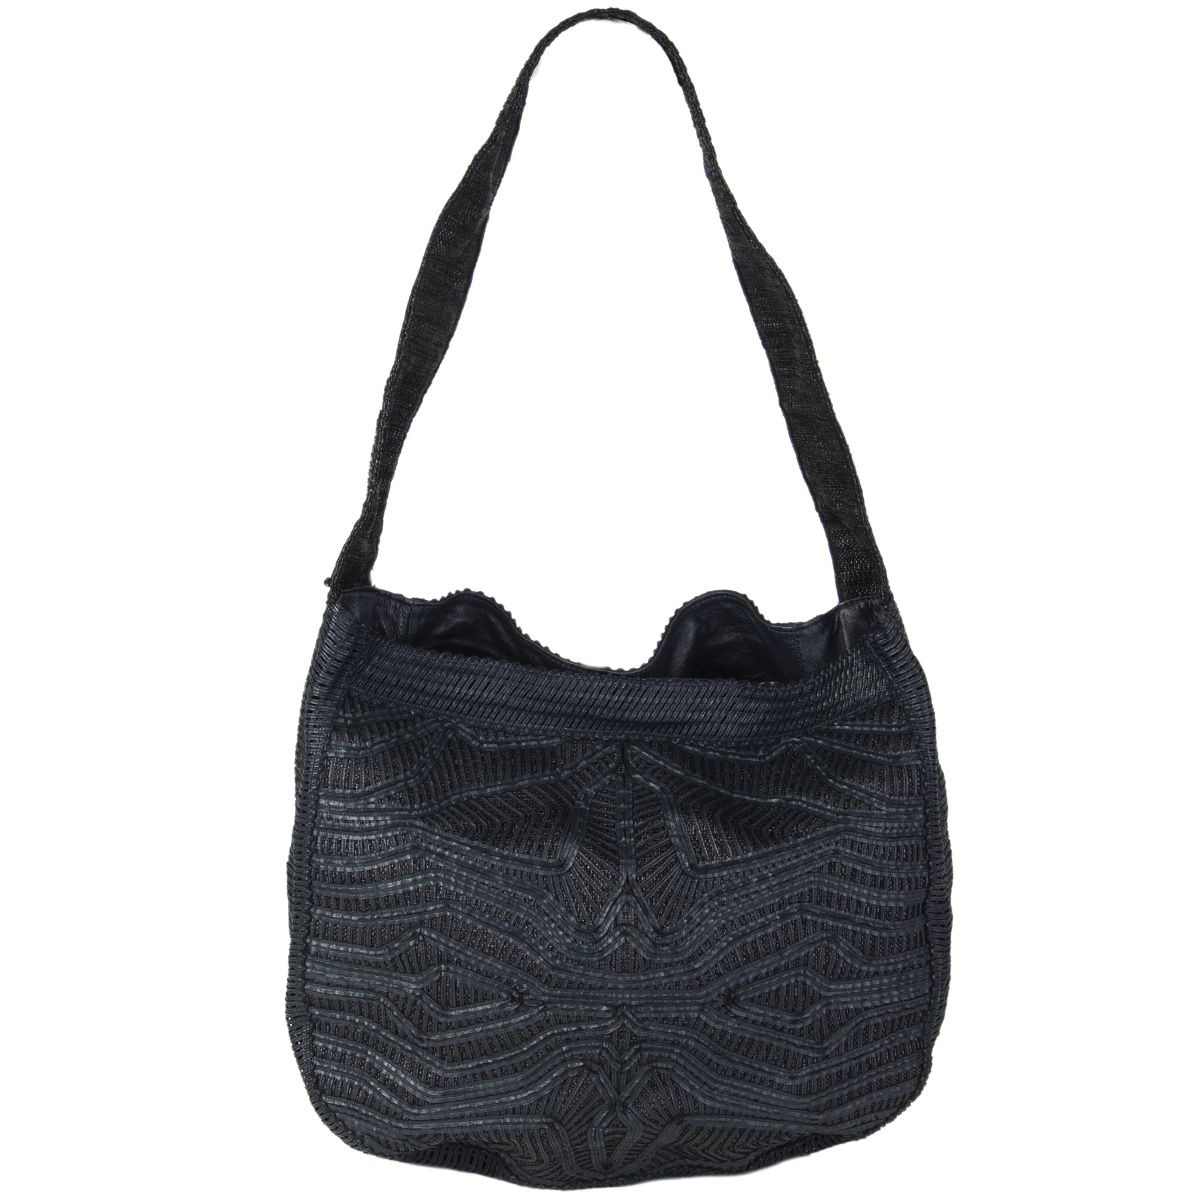 Armani Tote Top Sellers, UP TO 64% OFF | www.aramanatural.es